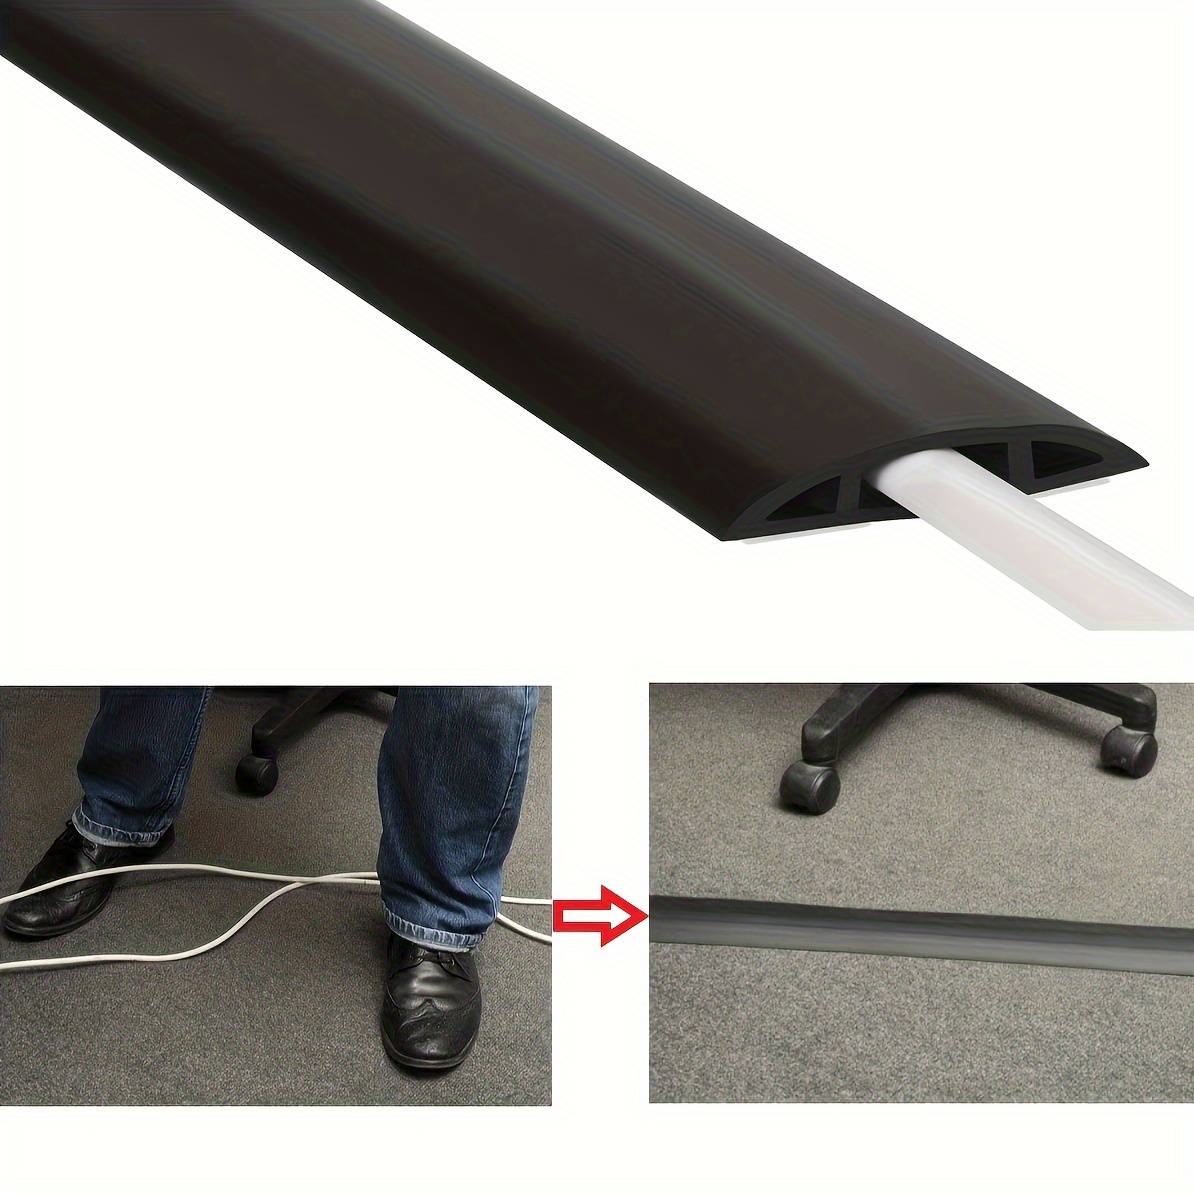 1pc 4FT Floor Cord Cover, Floor Cable Protector, Extension Cord Cover,  Protect Wires & Prevent Cable Trips, Cable Management Solution - Cord  Cavity